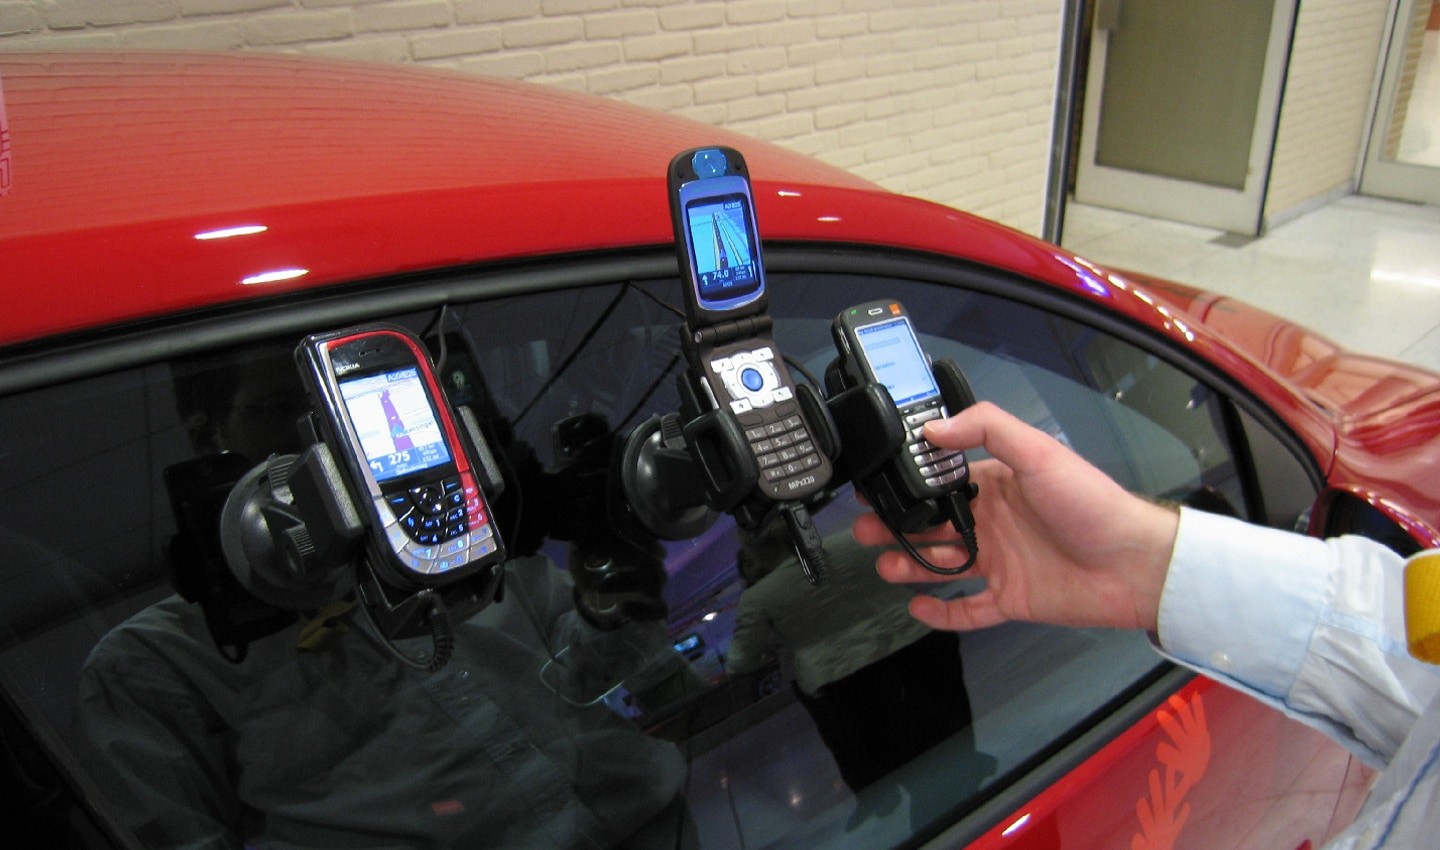 A selection of TomTom’s early phone-based navigation applications.